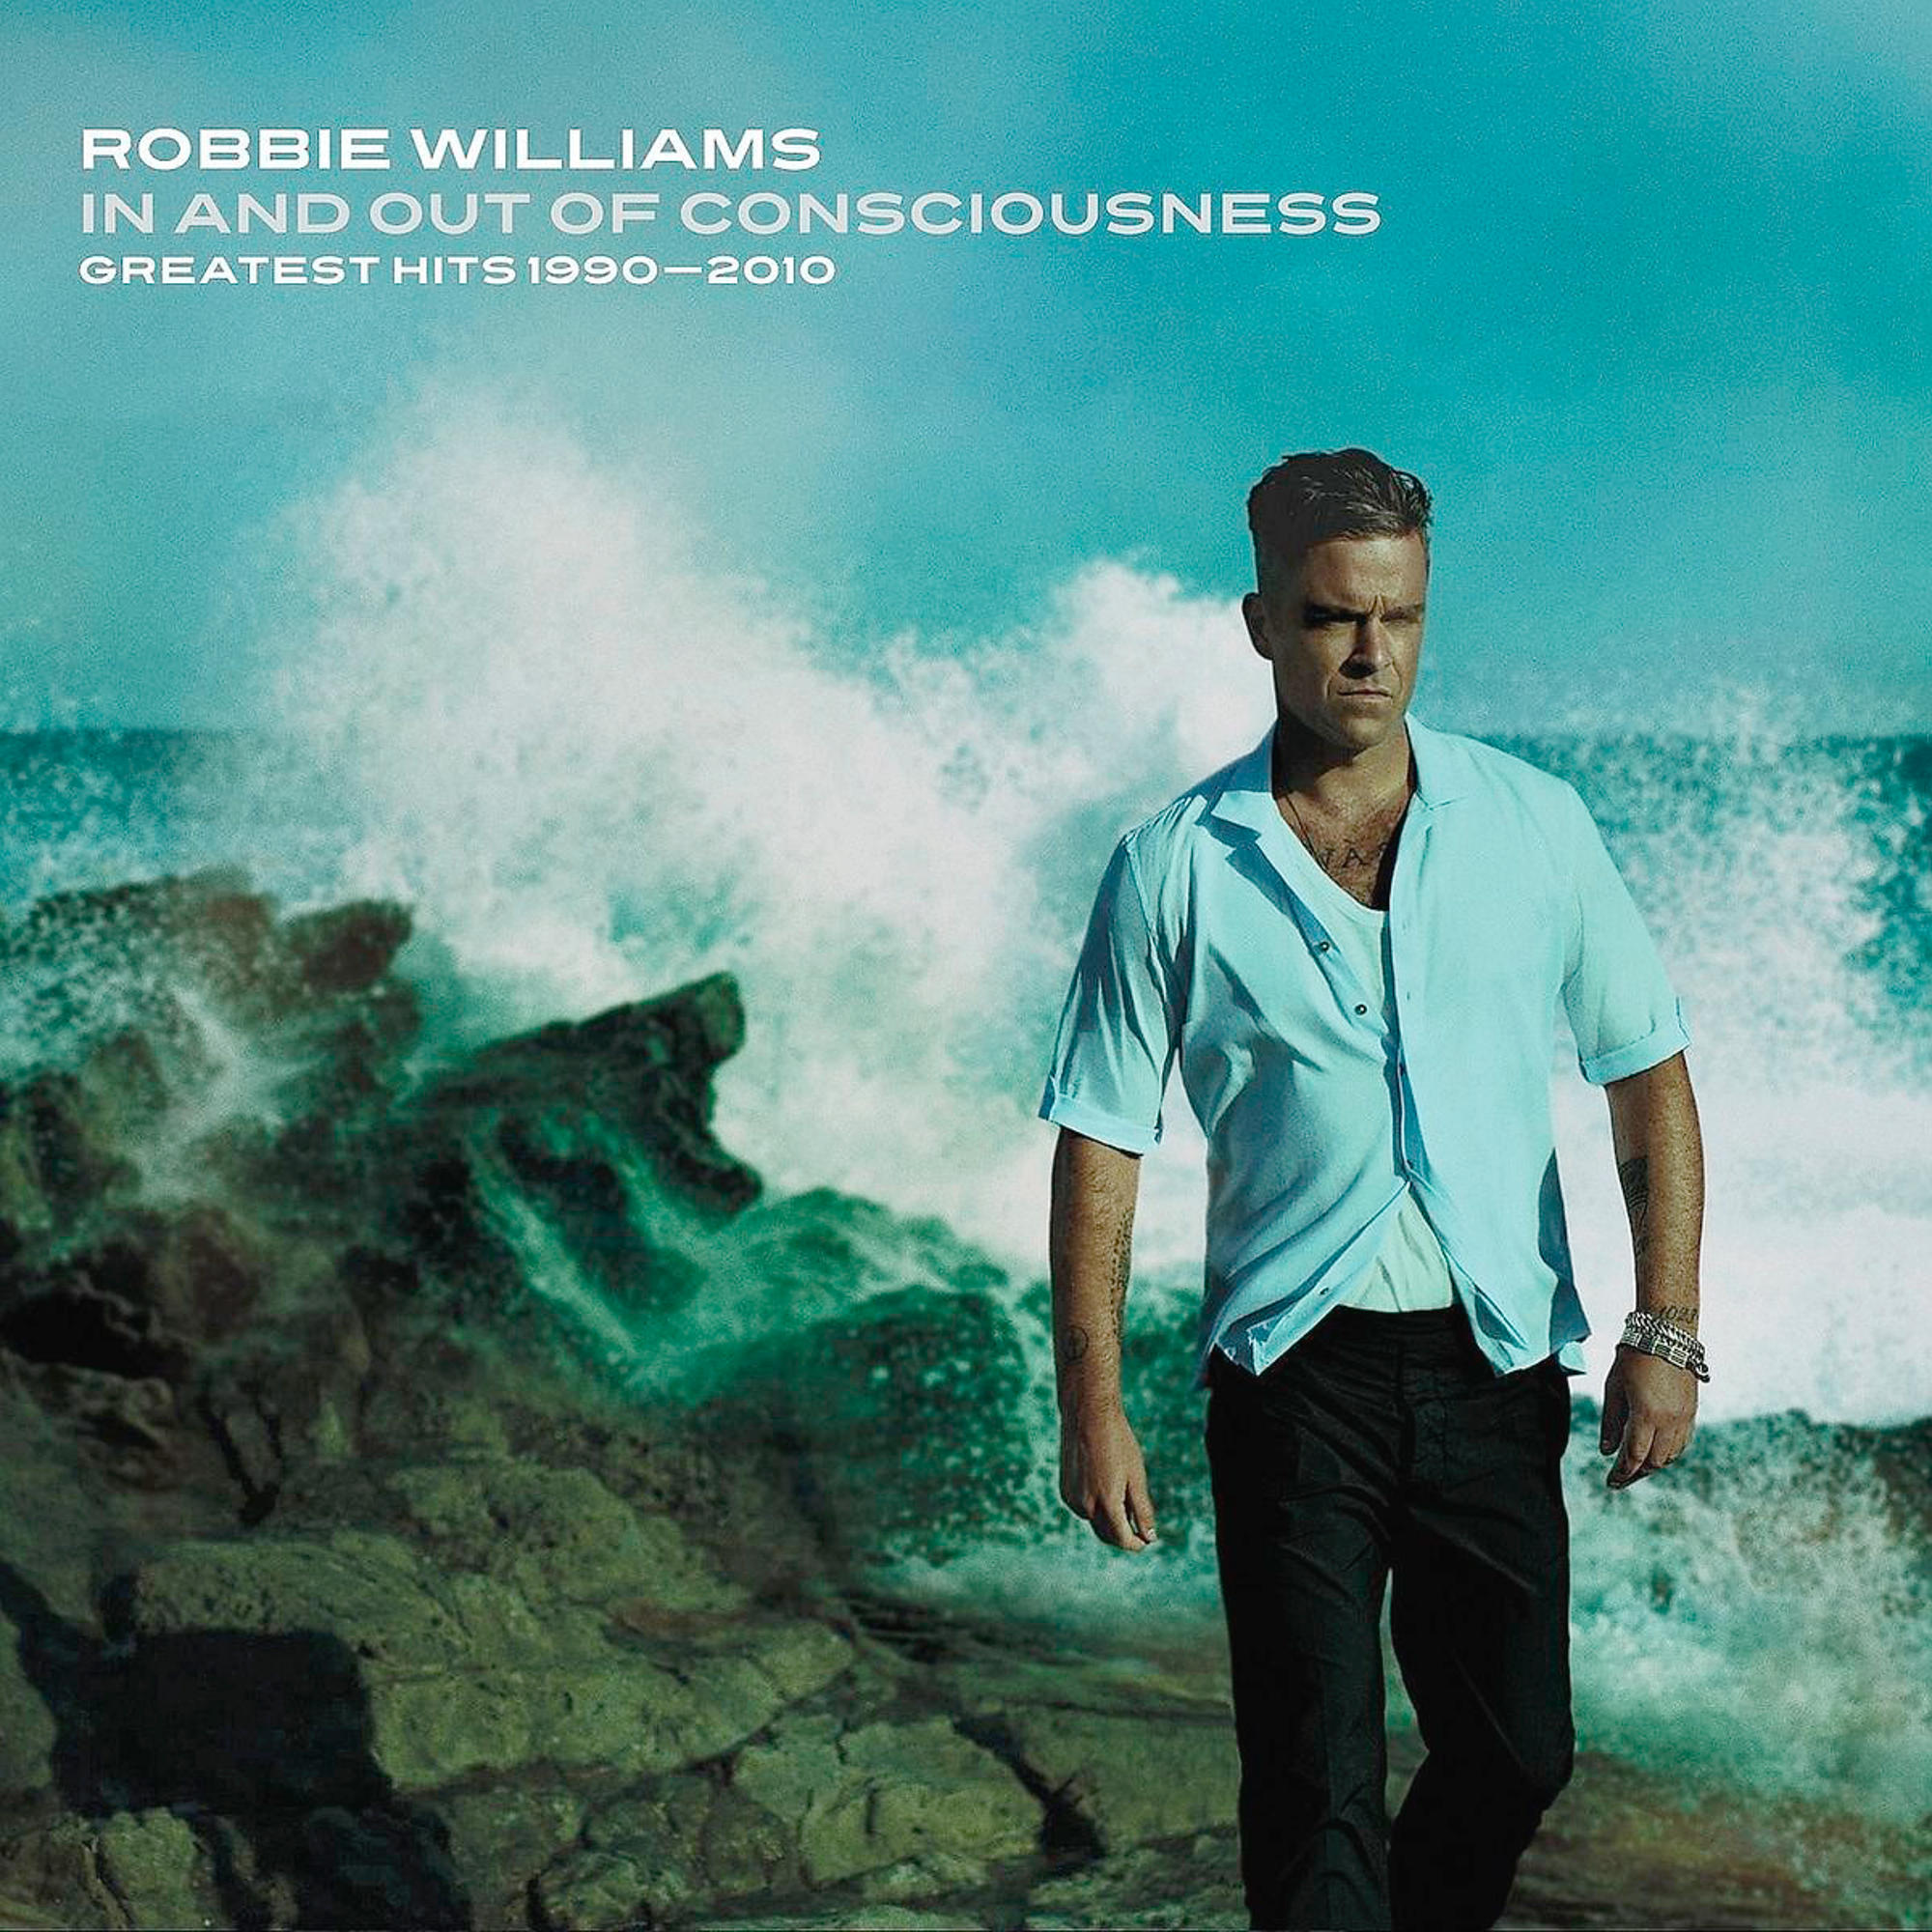 In Robbie (CD) Consciousness - Out Williams And - Of